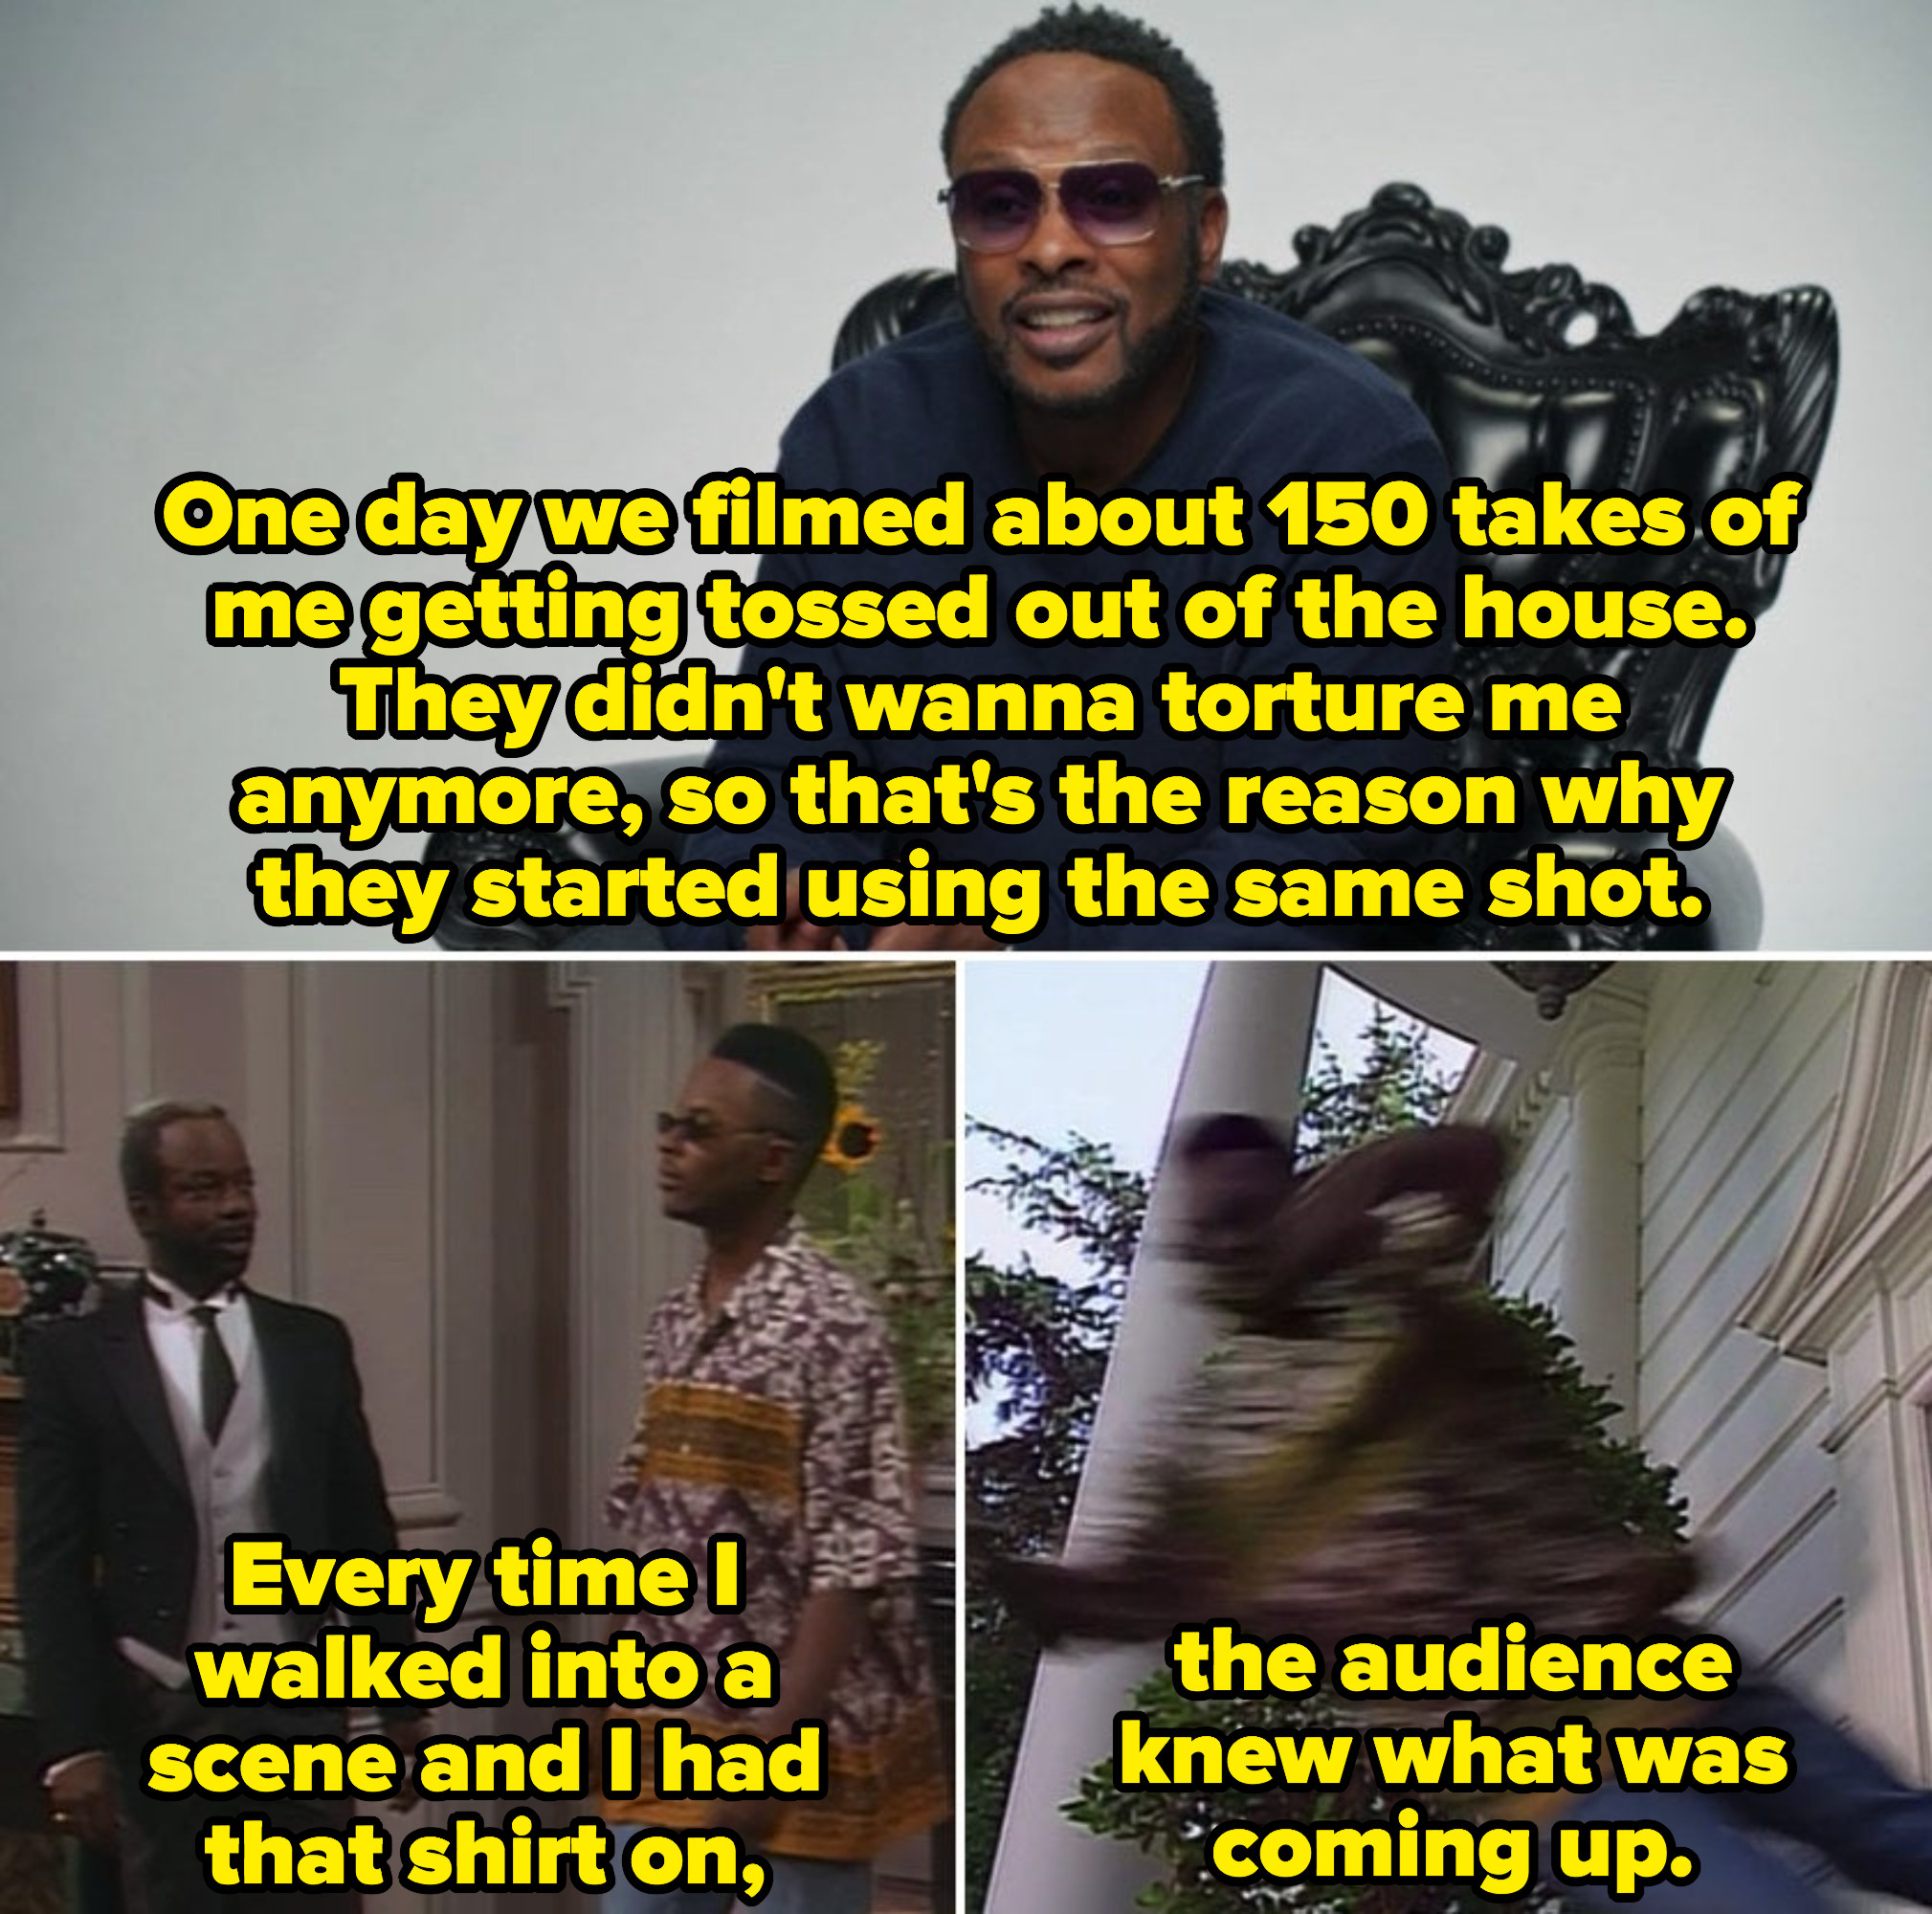 DJ Jazzy Jeff describing being thrown out of The Banks&#x27; house in 150 takes, and a clip of Jazz being thrown out in one of his classic shirts